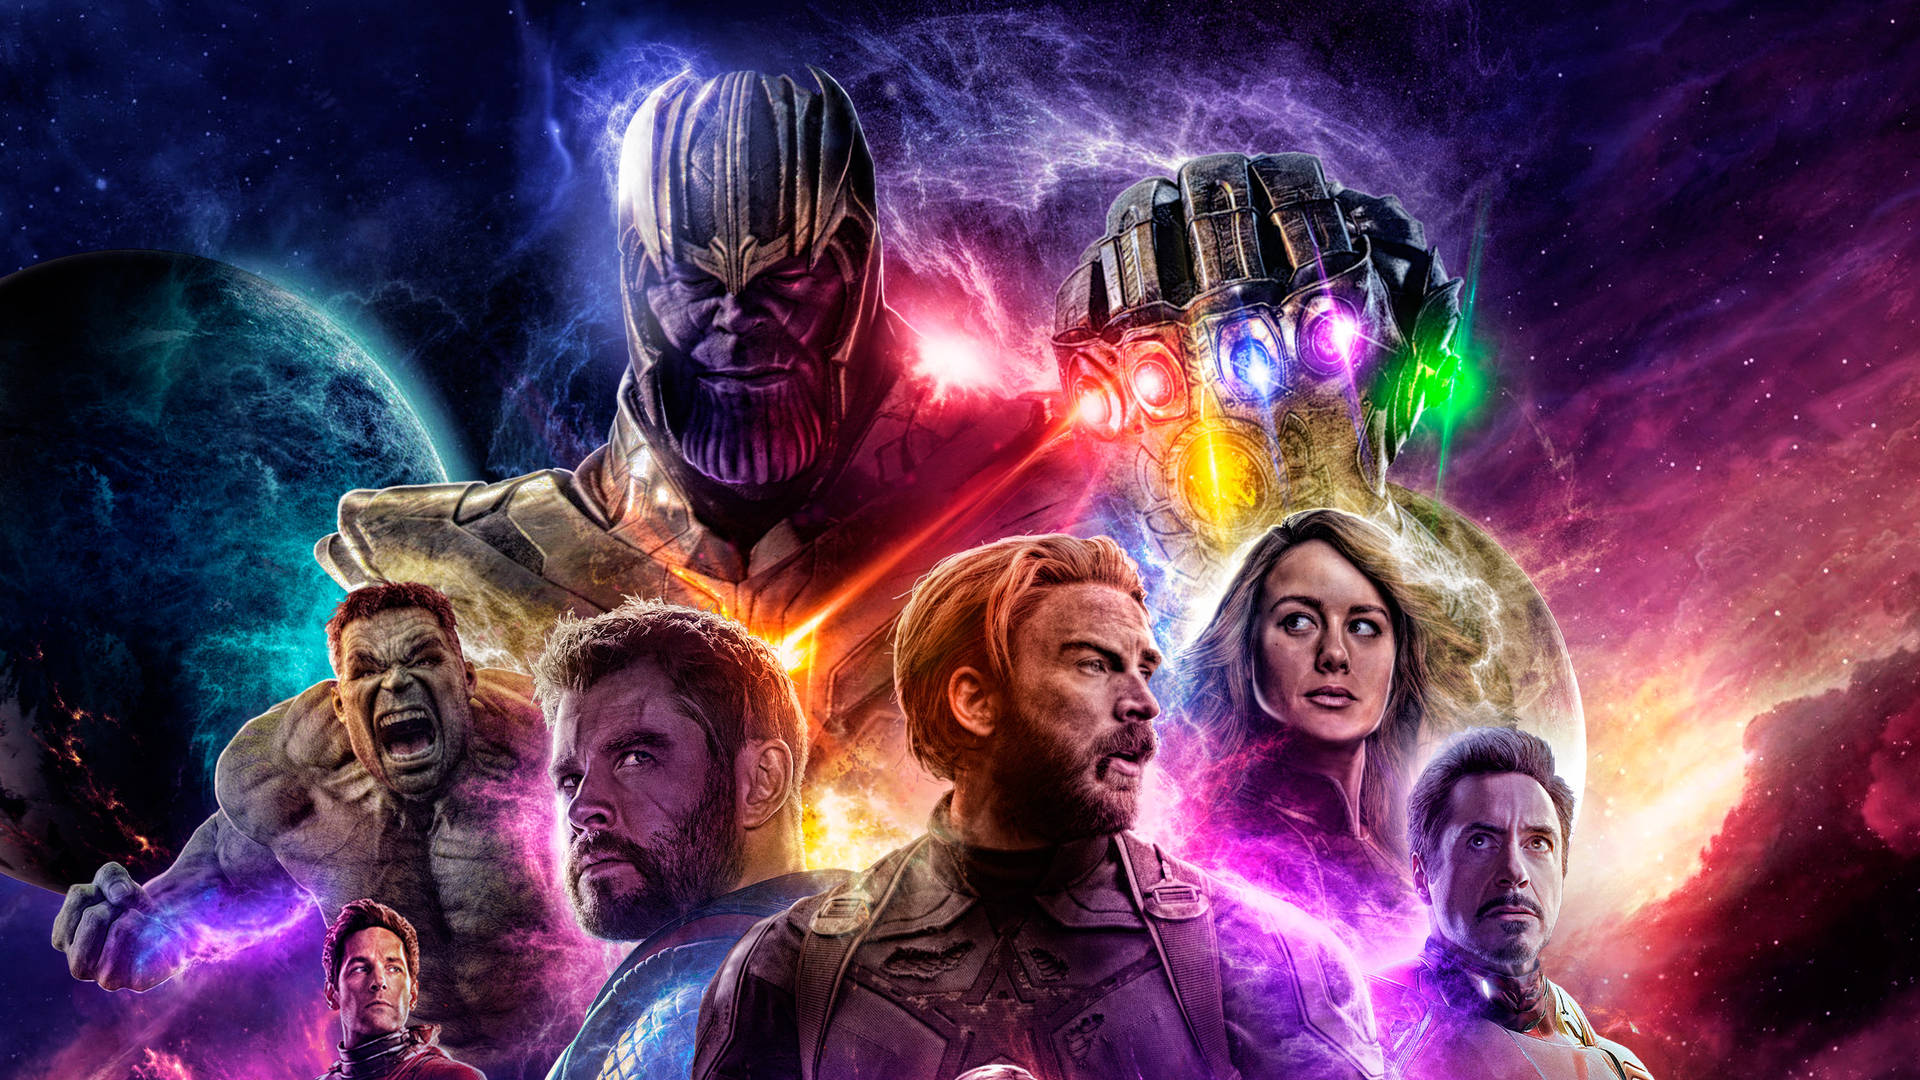 Marvel fans around the world are rejoicing with the theatrical release of Avengers: Endgame Wallpaper